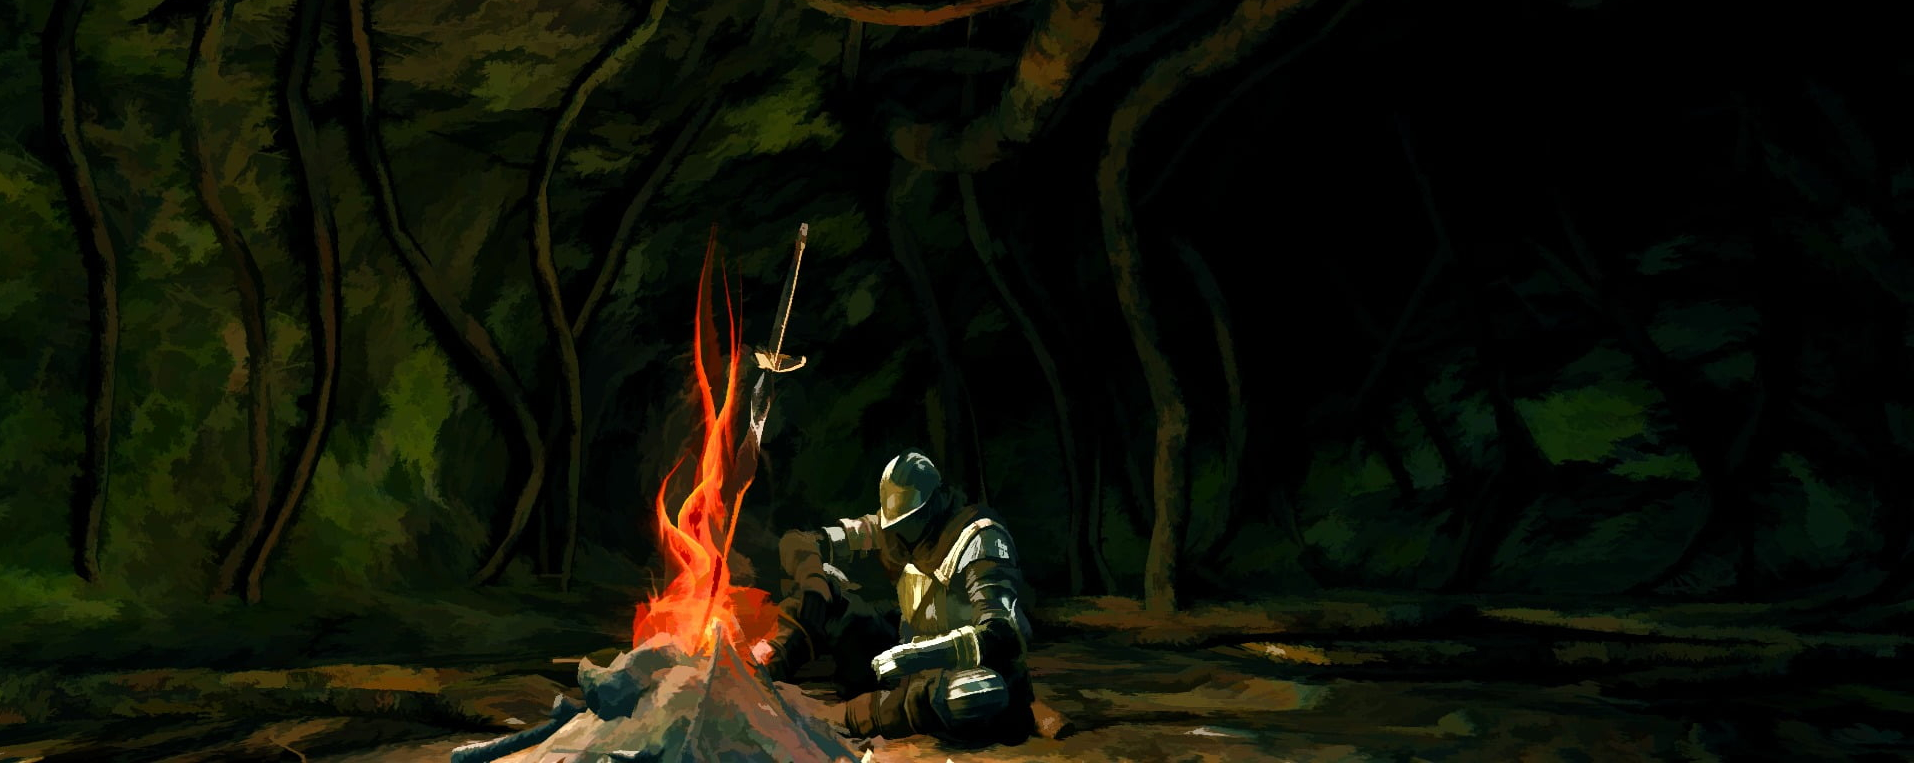 DARK SOULS, Difficulty, and Comfort in Failure